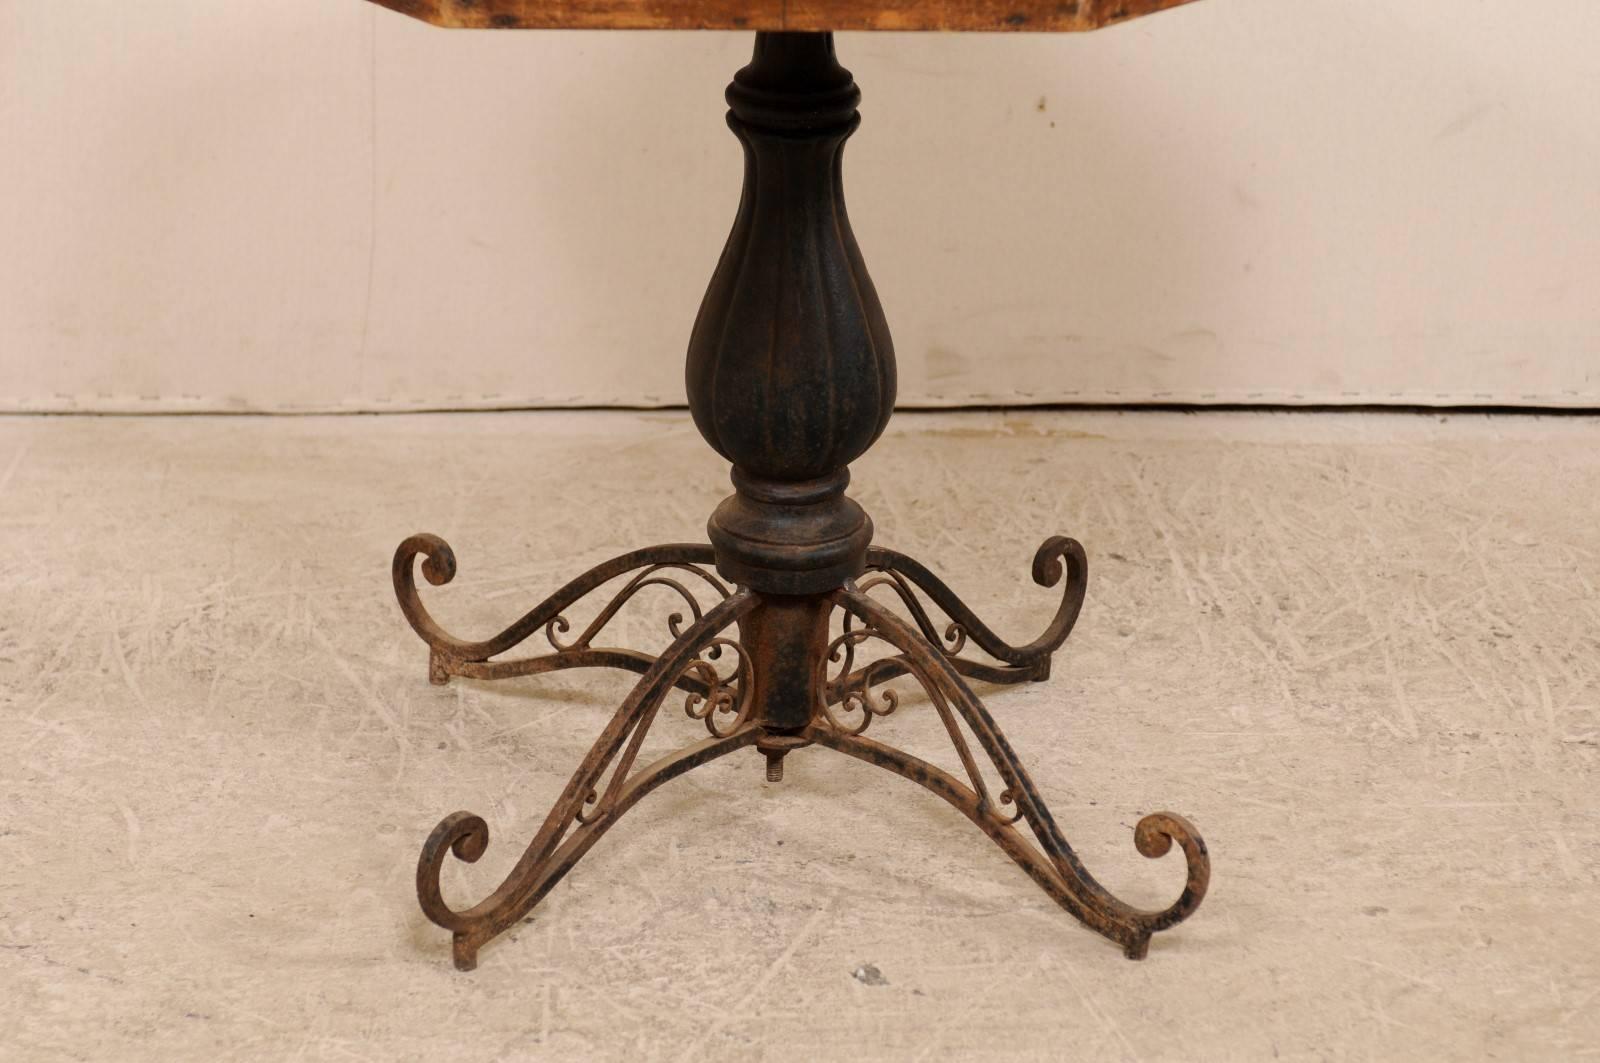 Rustic Whimsical Late 19th Century Crokinole Gaming Pedestal Table of Iron and Wood